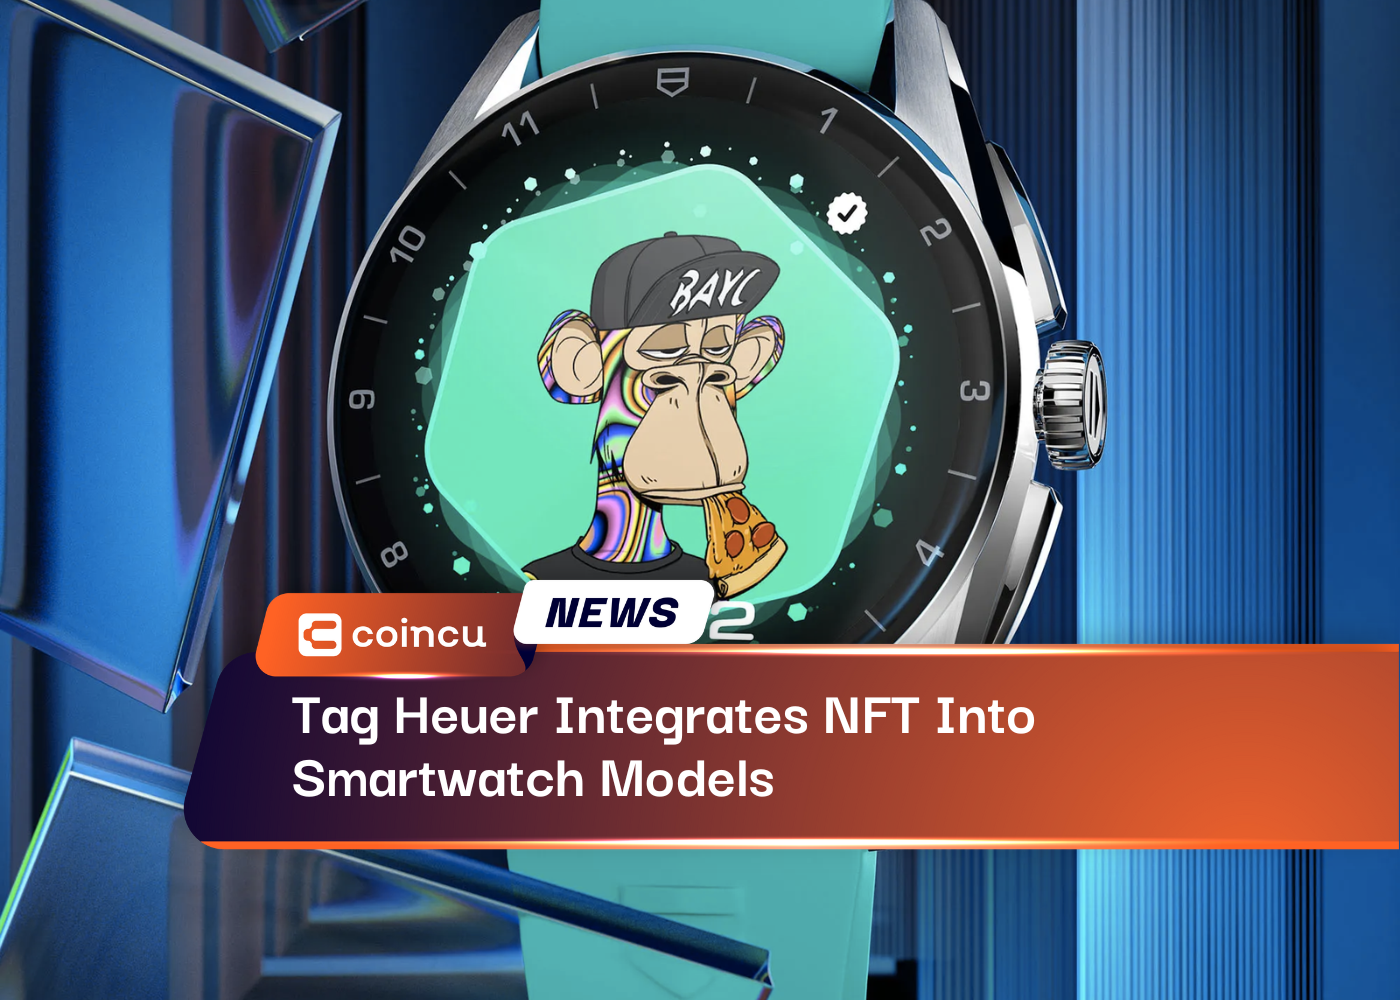 Tag Heuer Integrates NFT Into Smartwatch Models